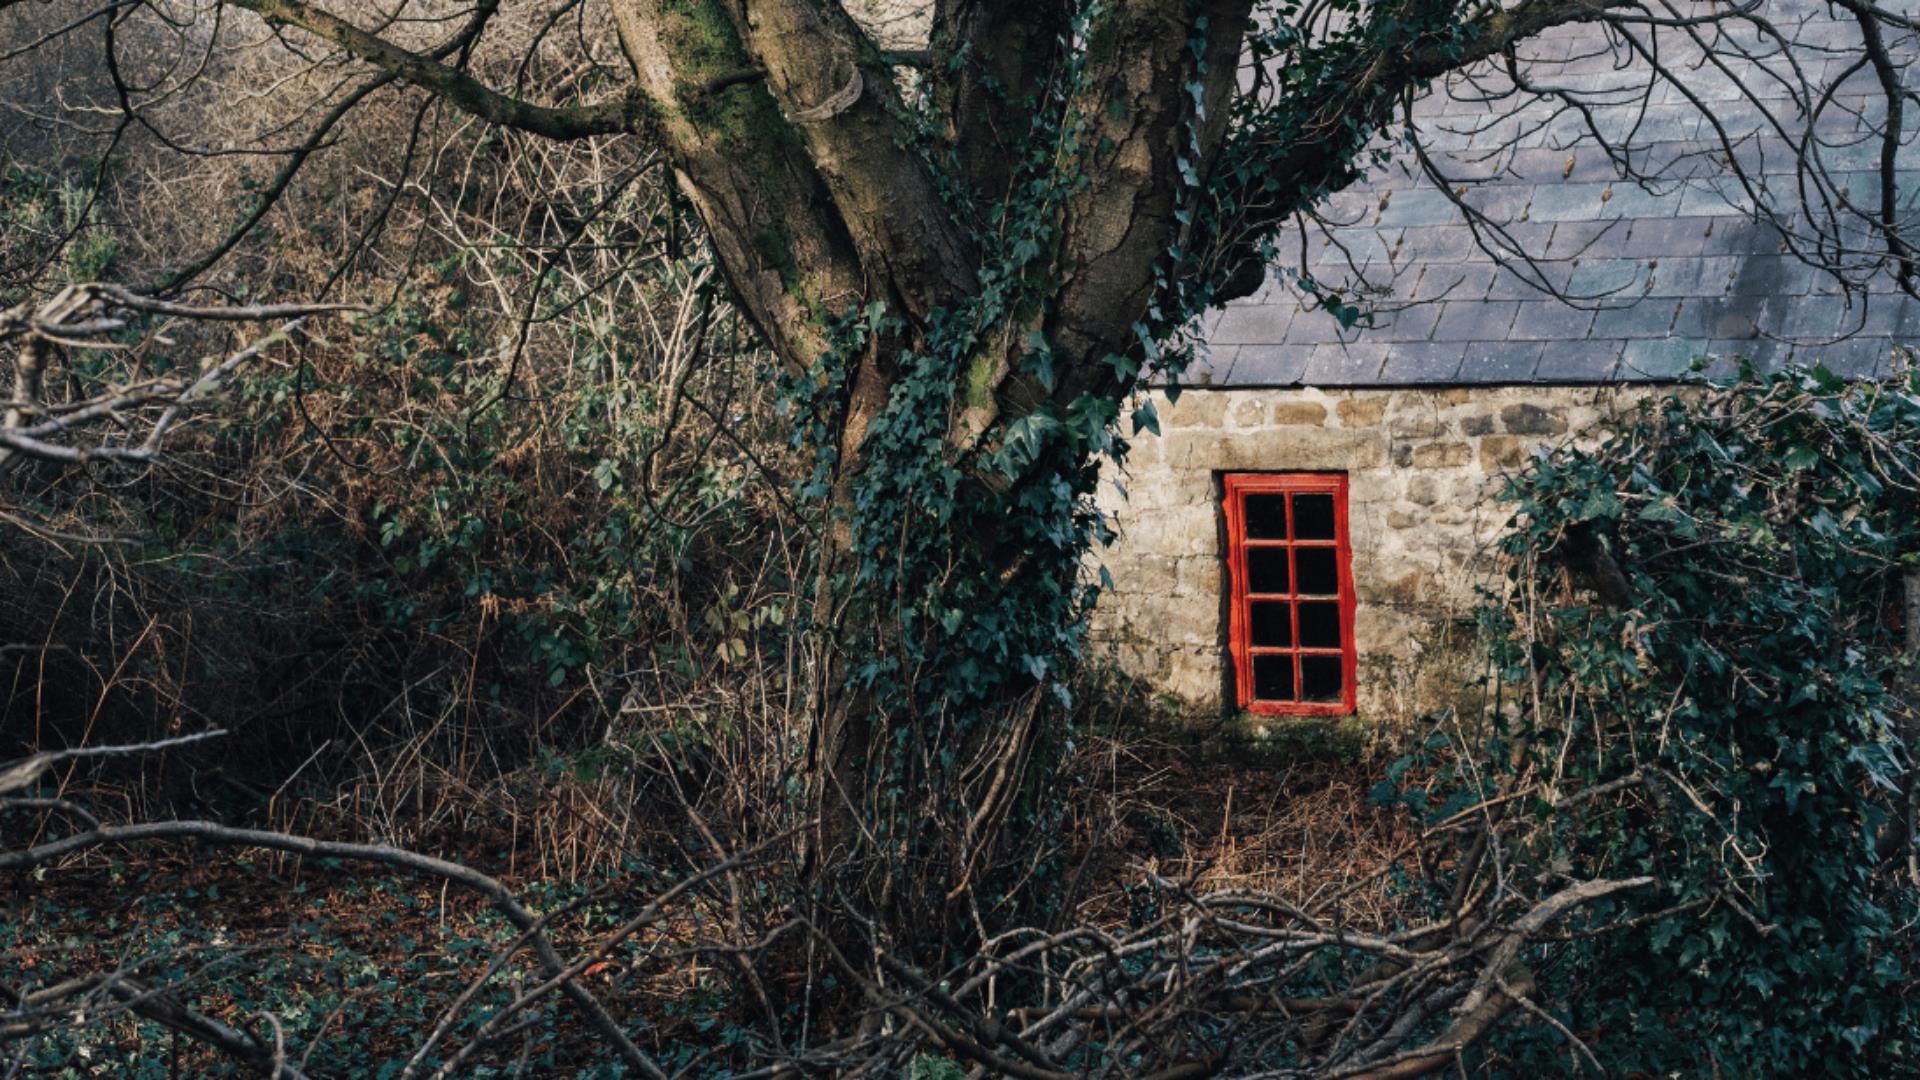 A stone cottage with a red framed block window behind trees and shrubbery